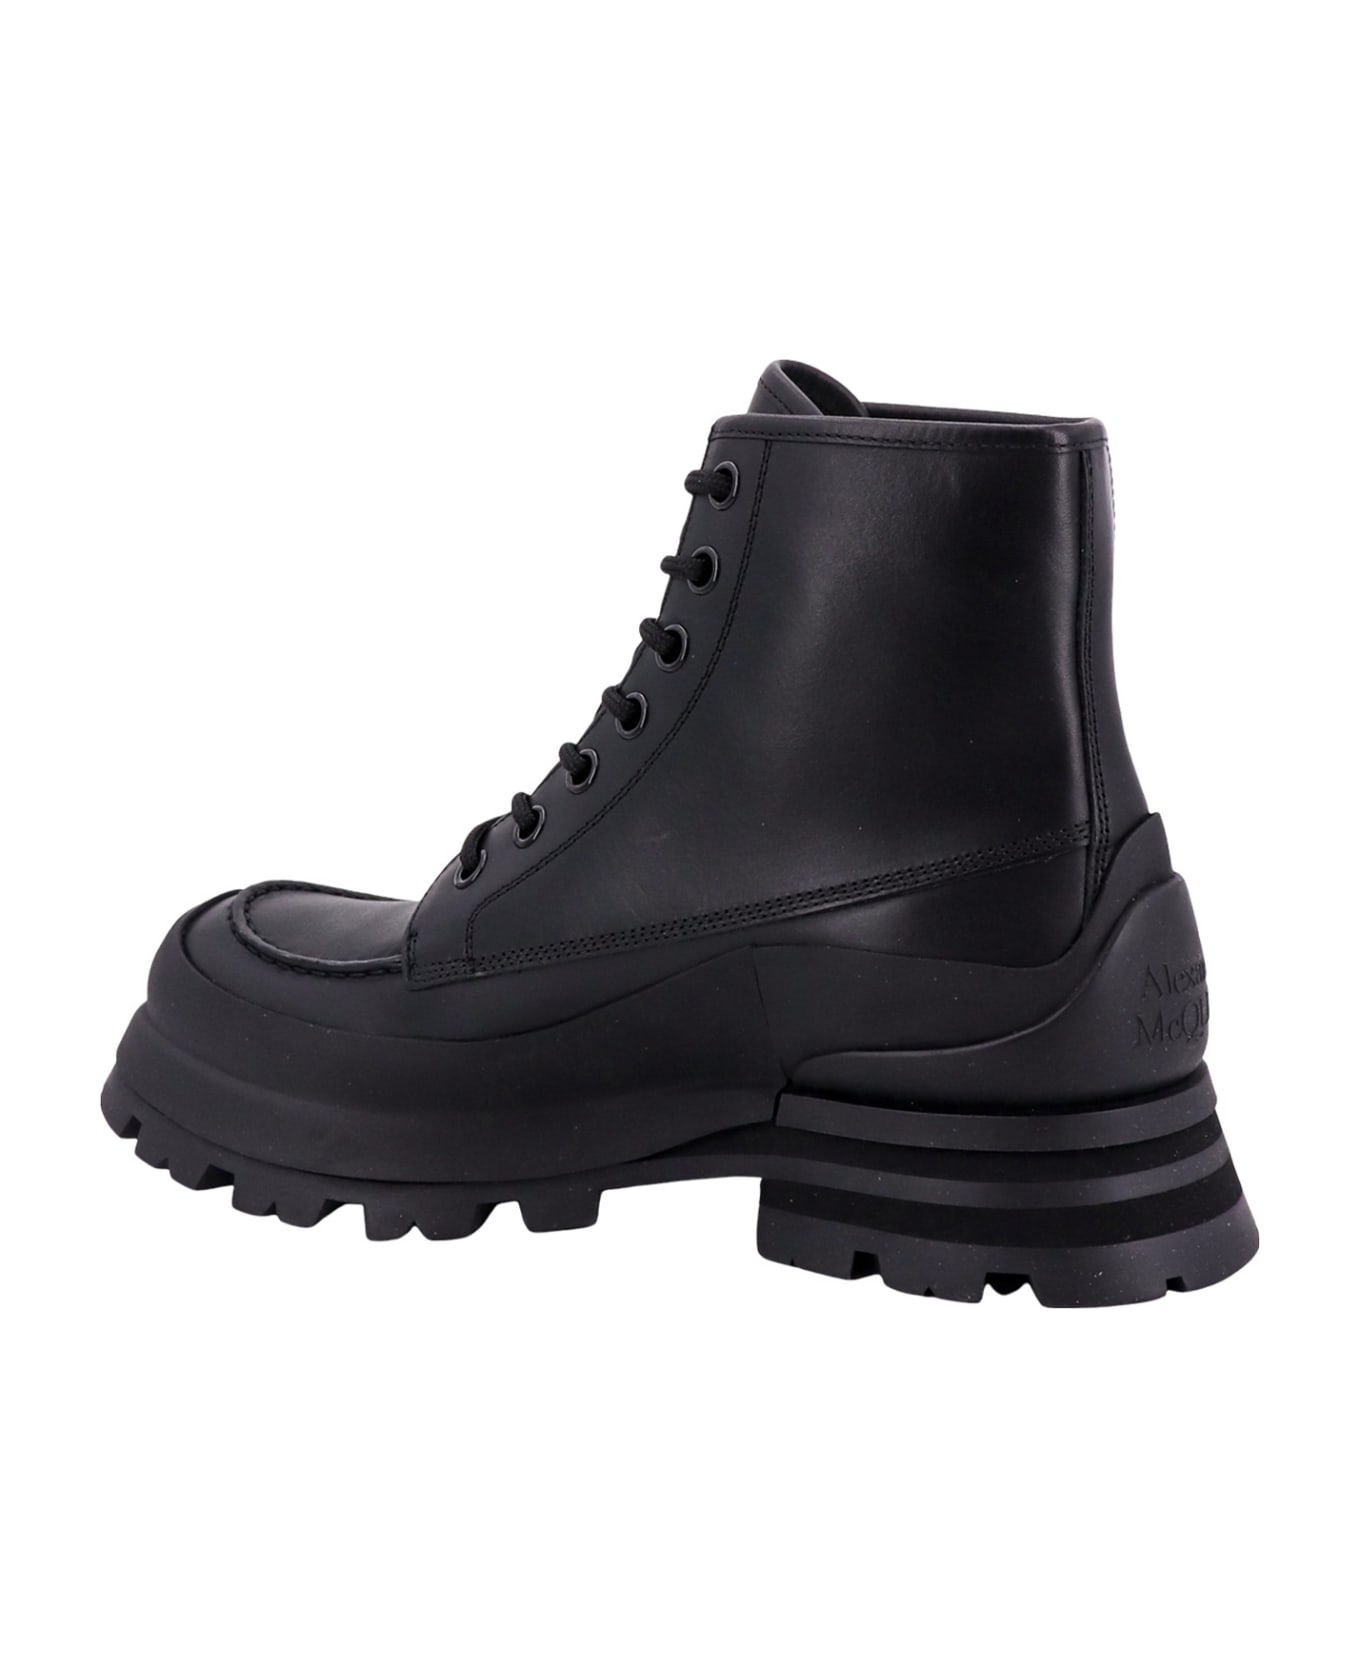 Alexander McQueen Wander Ankle Boots With Laces - Black Black